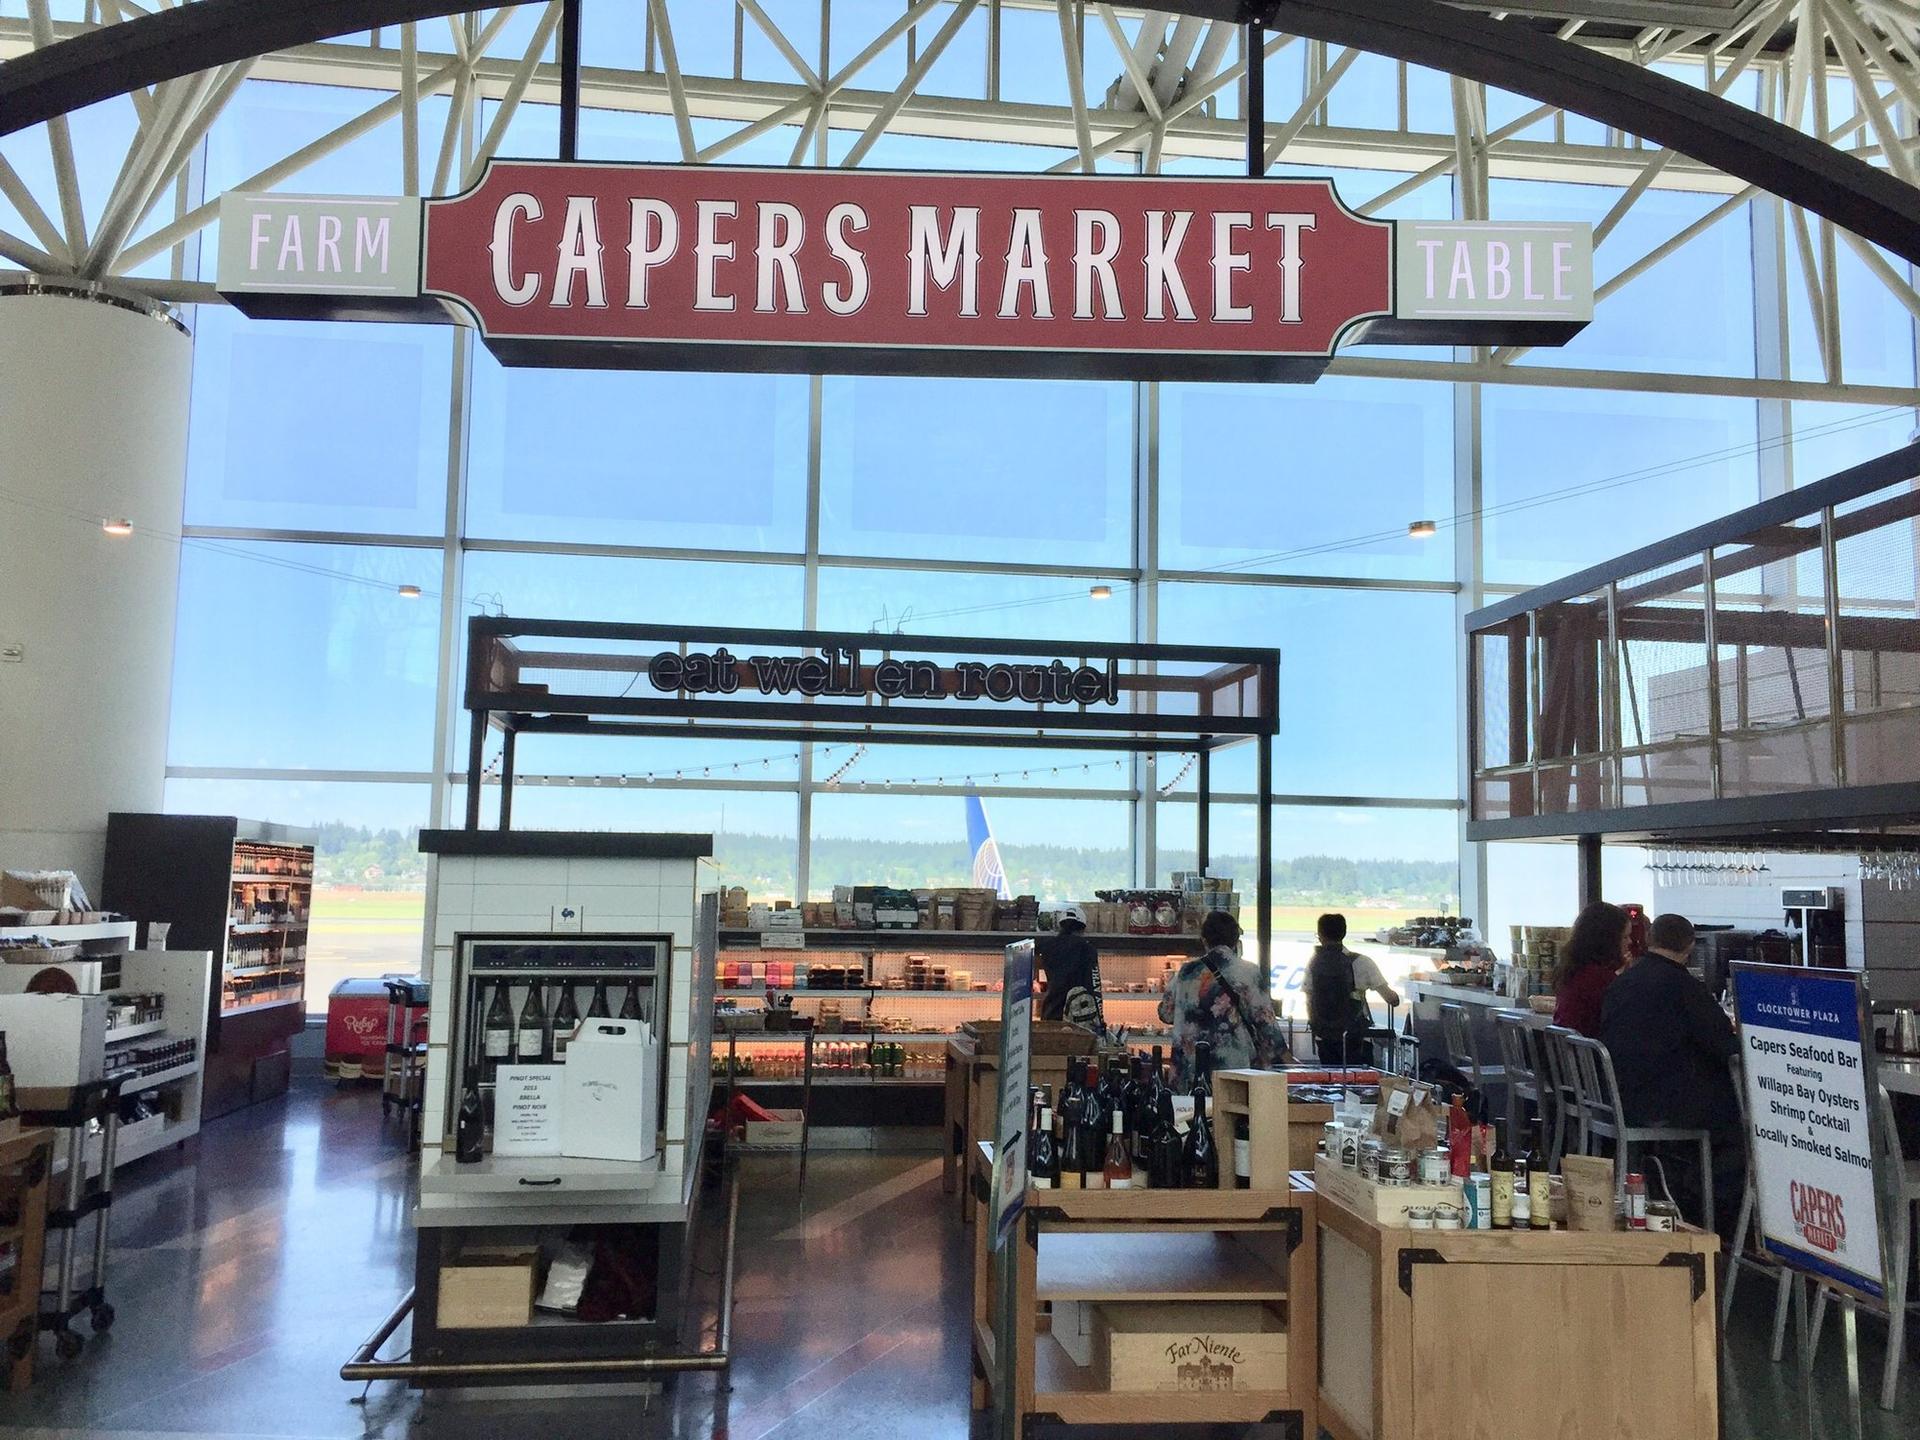 Capers Market image 6 of 46